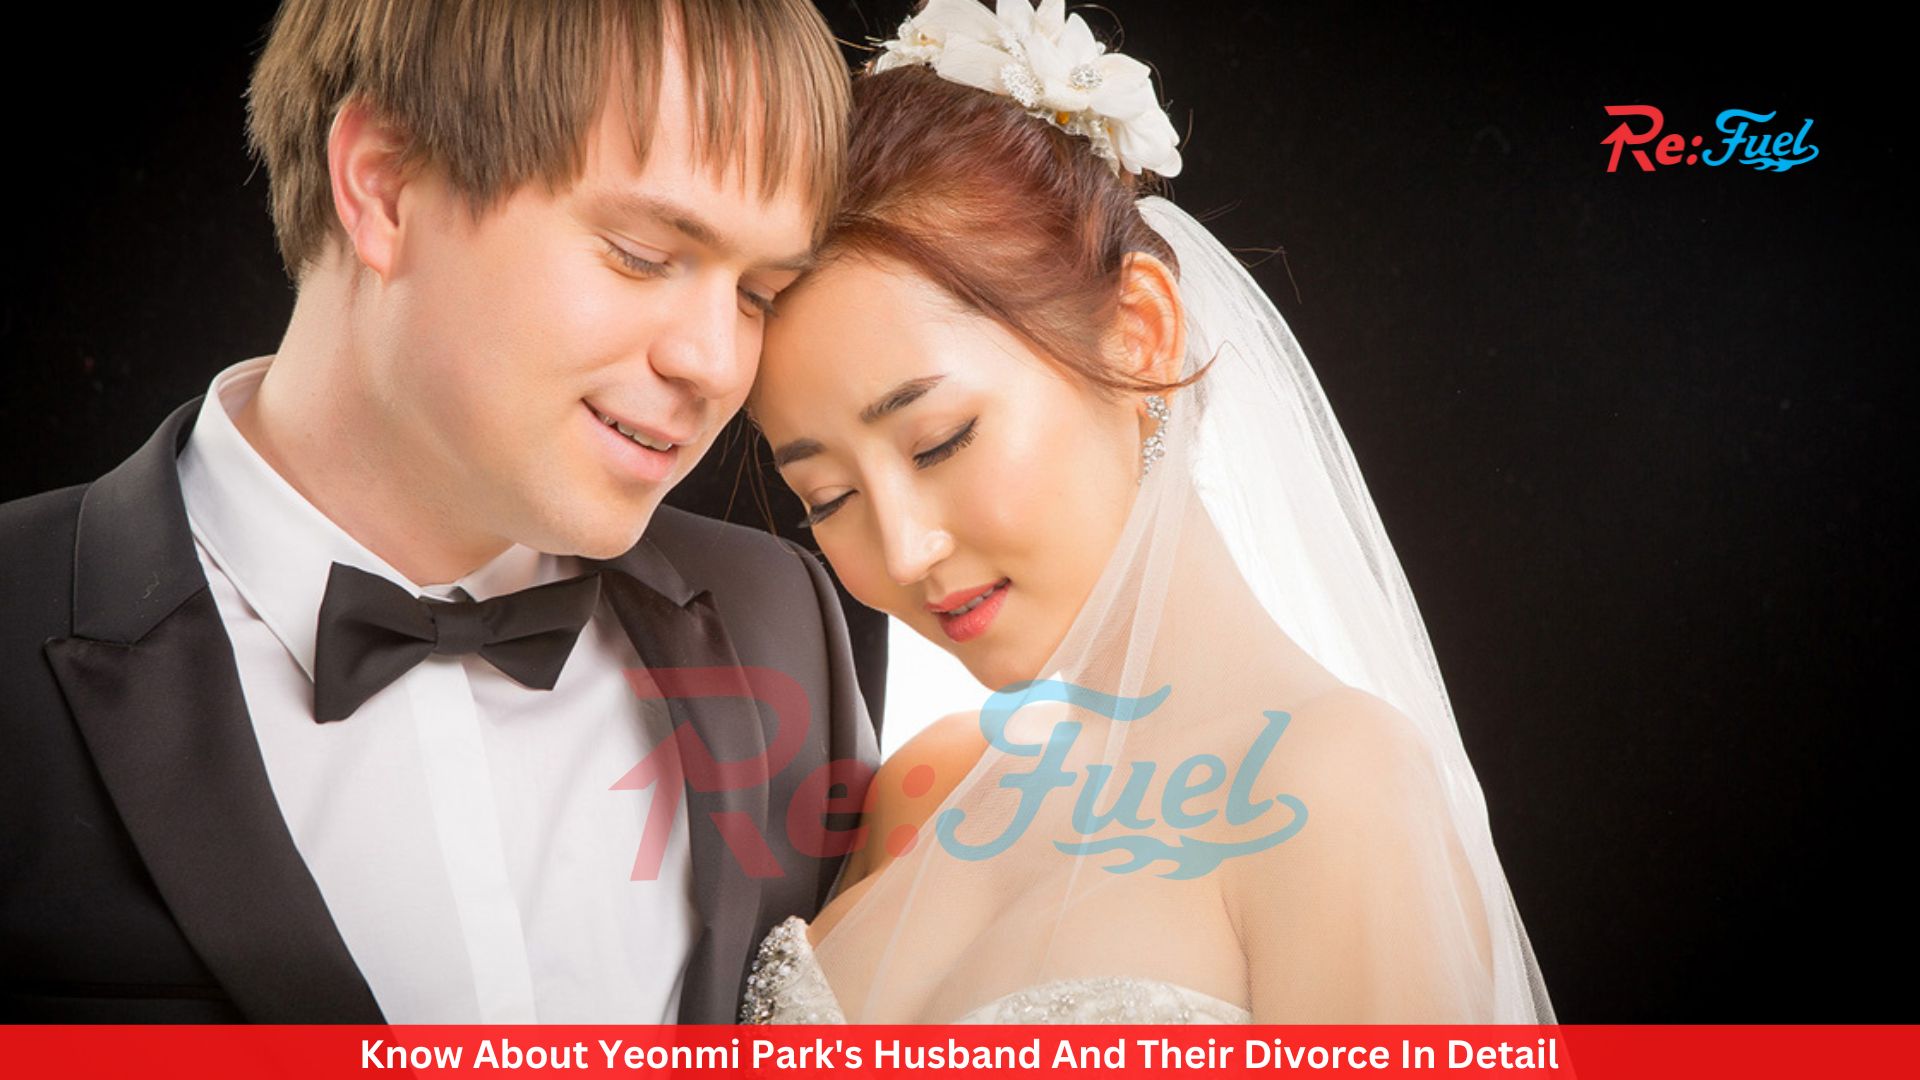 Know About Yeonmi Park's Husband And Their Divorce In Detail